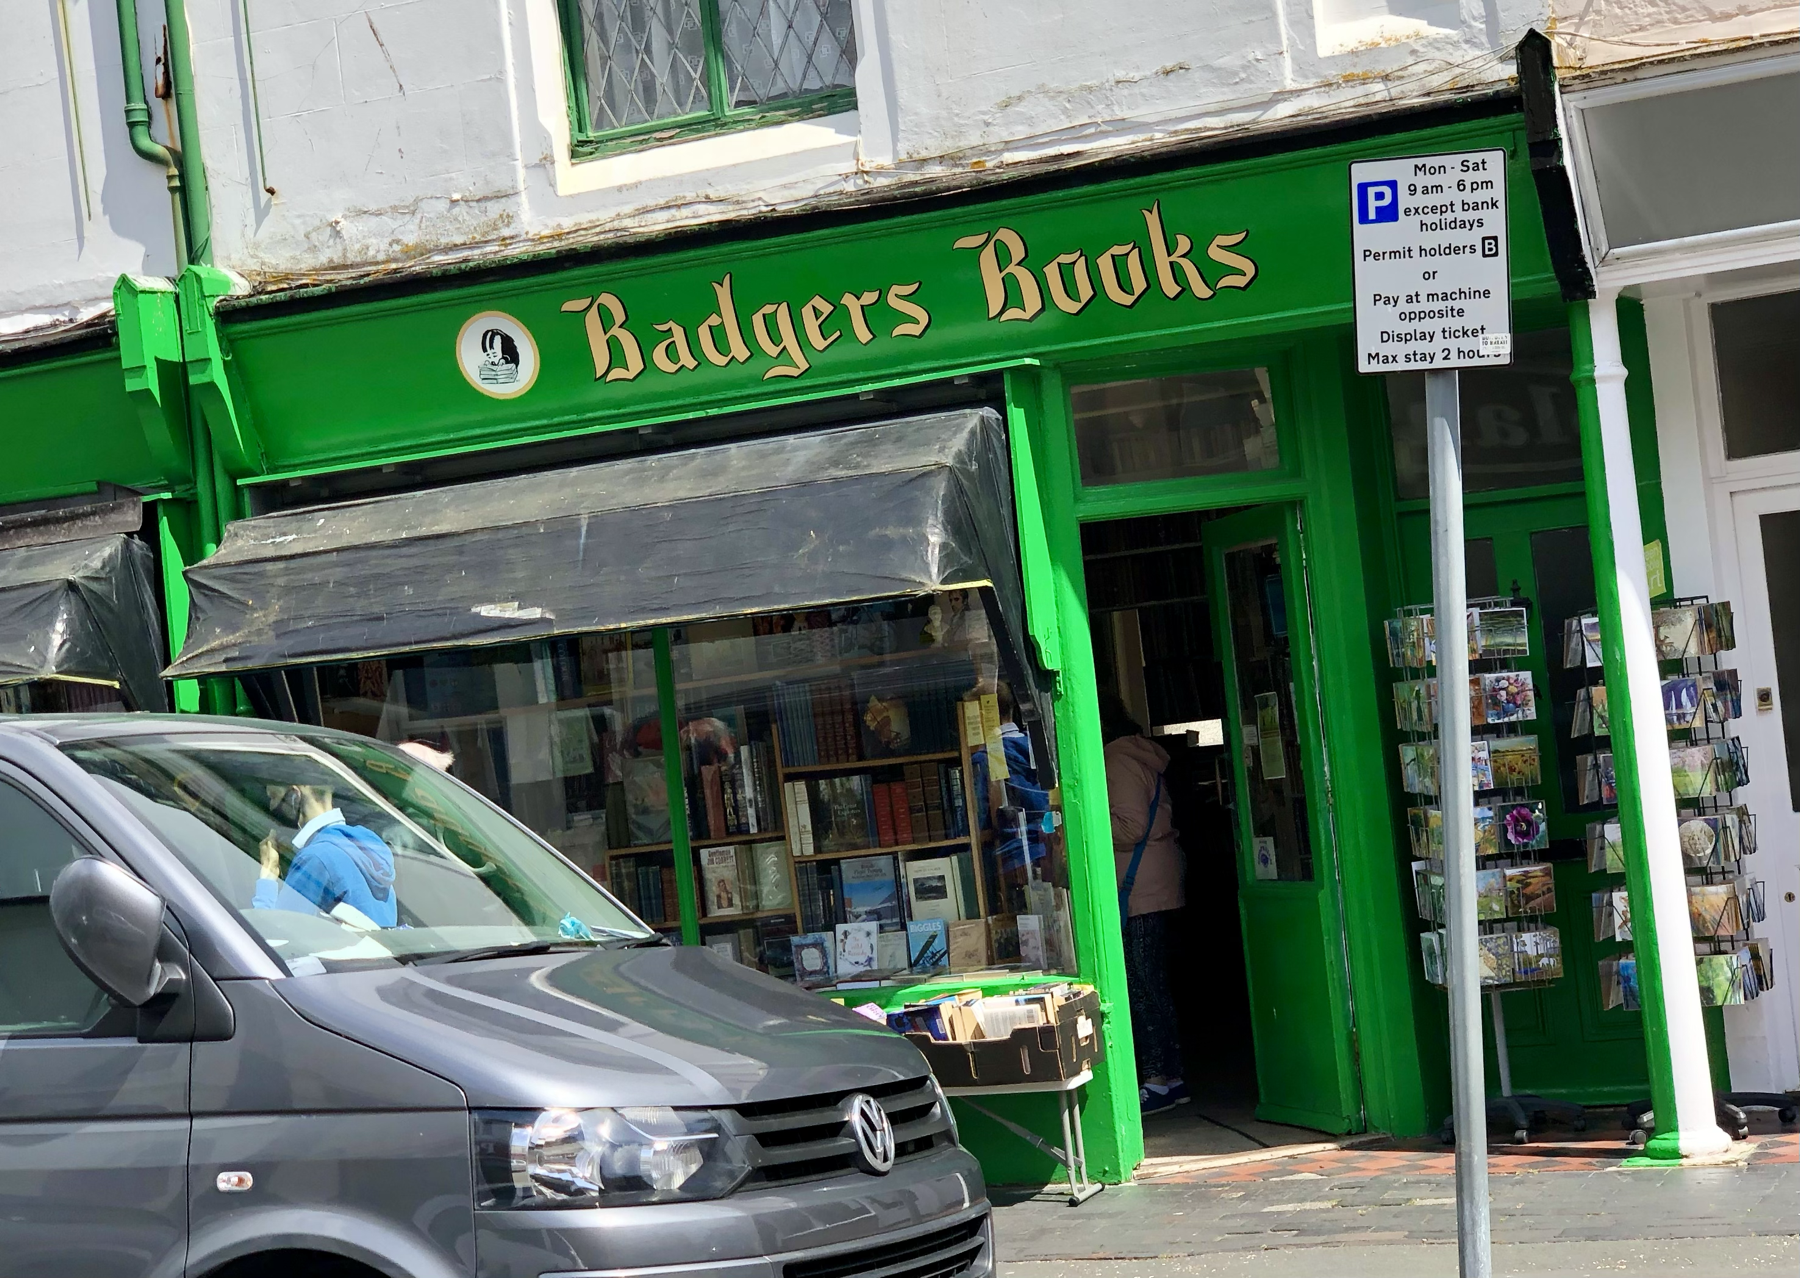 Badgers Books in Worthing